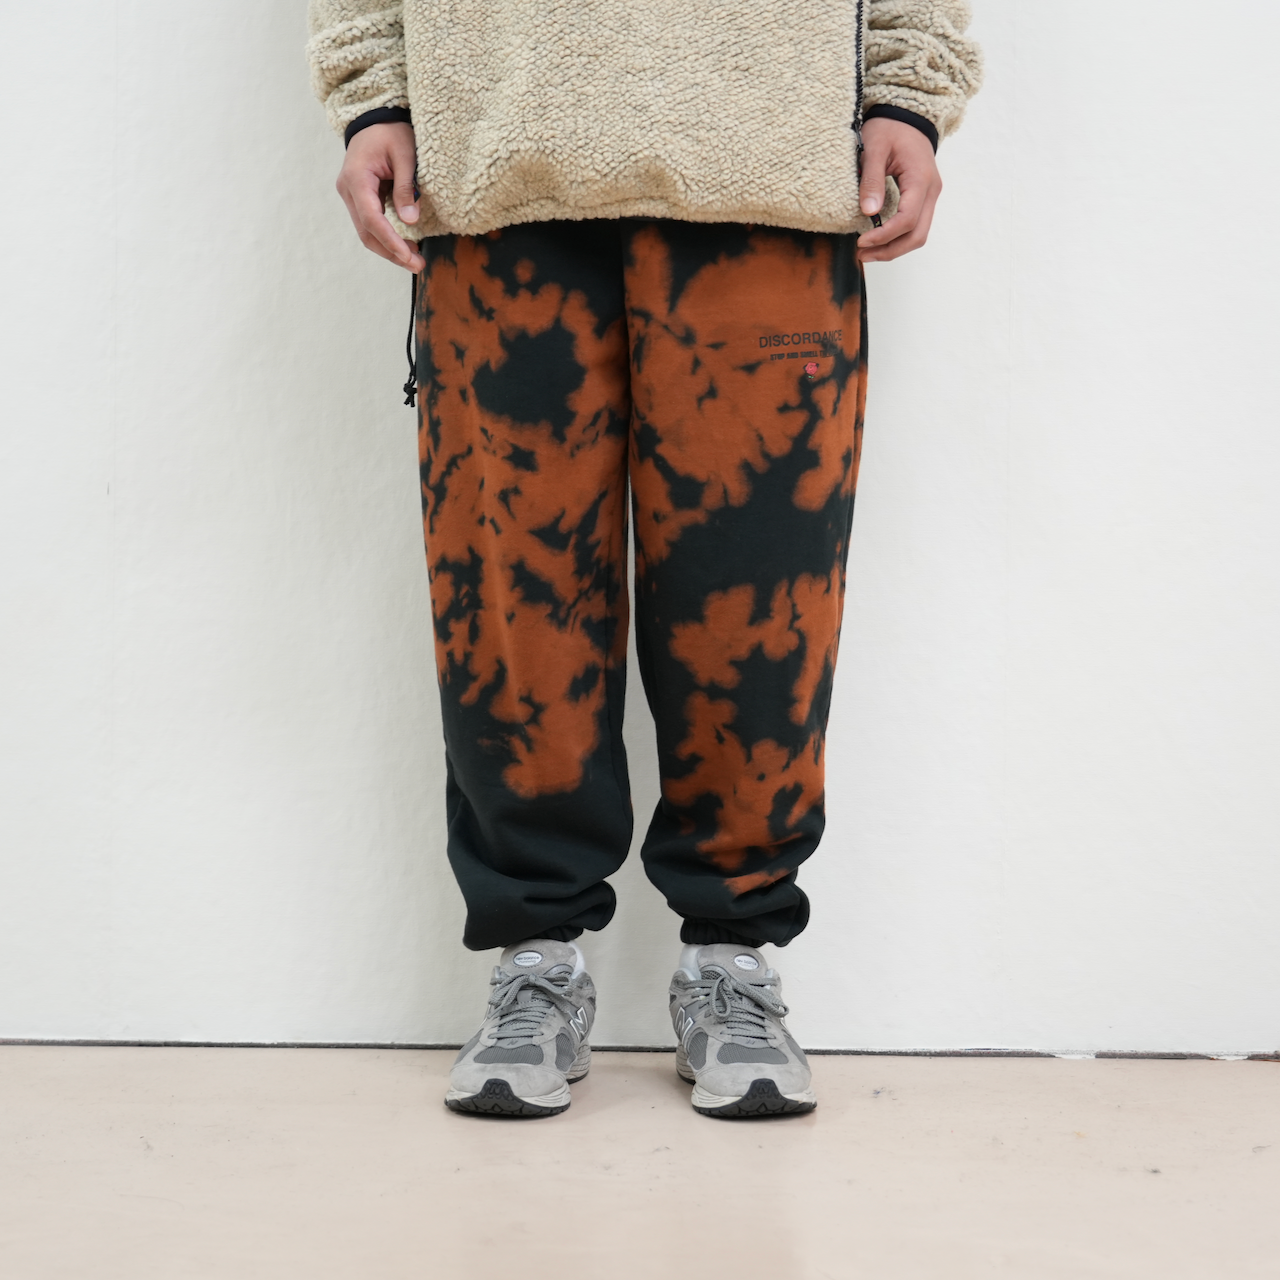 Children of the discordance・HAND DYEING SWEAT PANTS